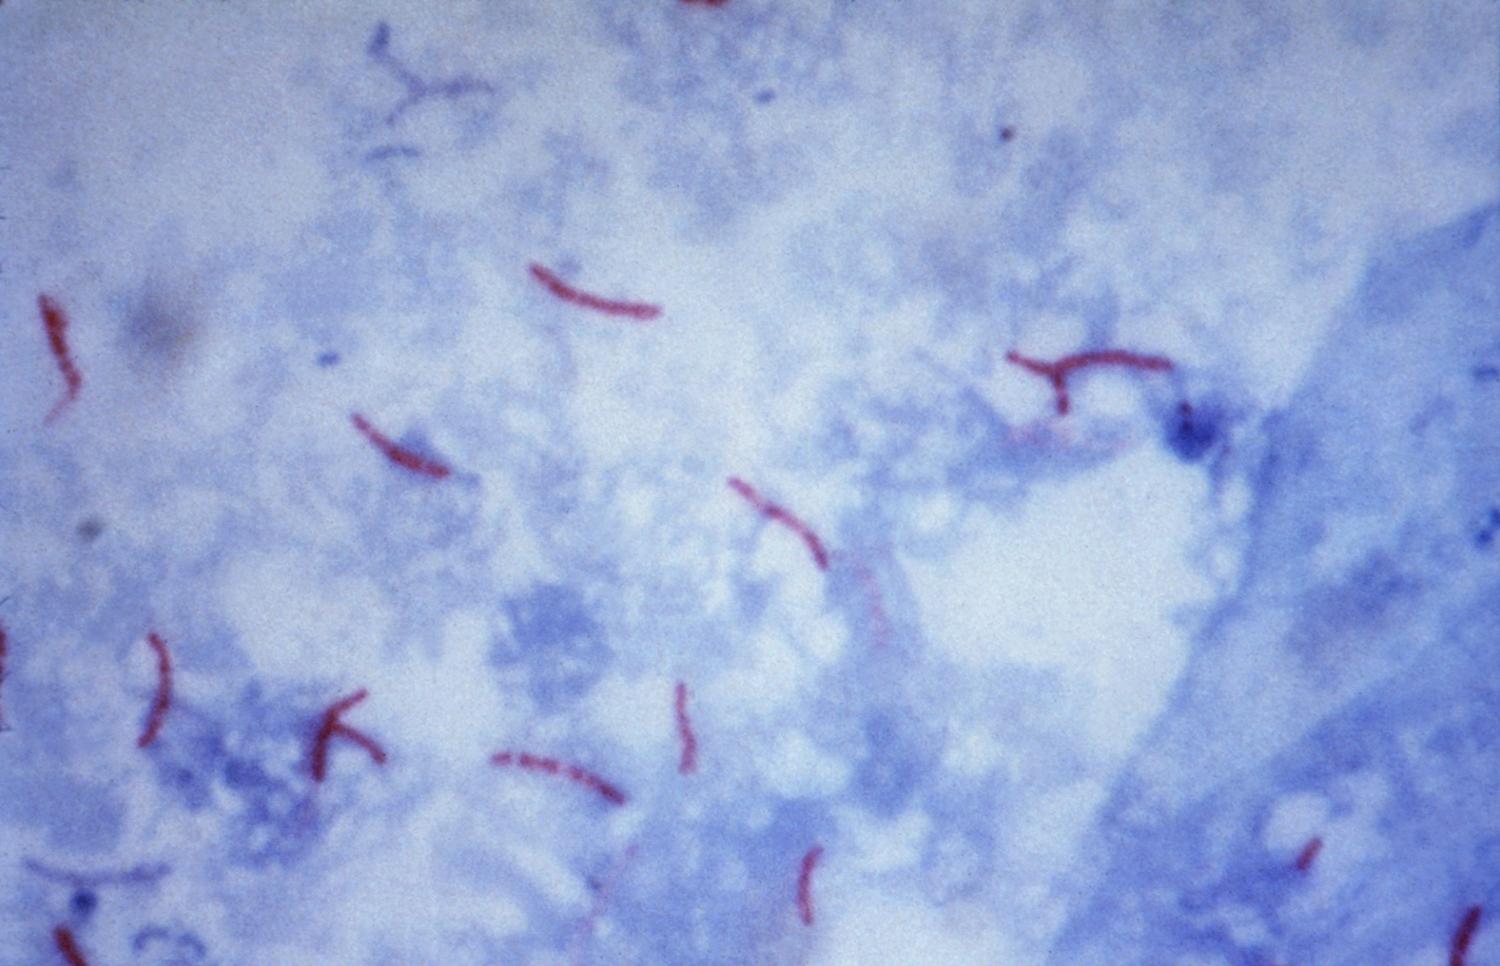 This photomicrograph reveals Mycobacterium tuberculosis bacteria using acid-fast Ziehl-Neelsen stain; Magnified 1000 X. The acid-fast stains depend on the ability of mycobacteria to retain dye when treated with mineral acid or an acid-alcohol solution such as the Ziehl-Neelsen, or the Kinyoun stains that are carbolfuchsin methods specific for M. tuberculosis.